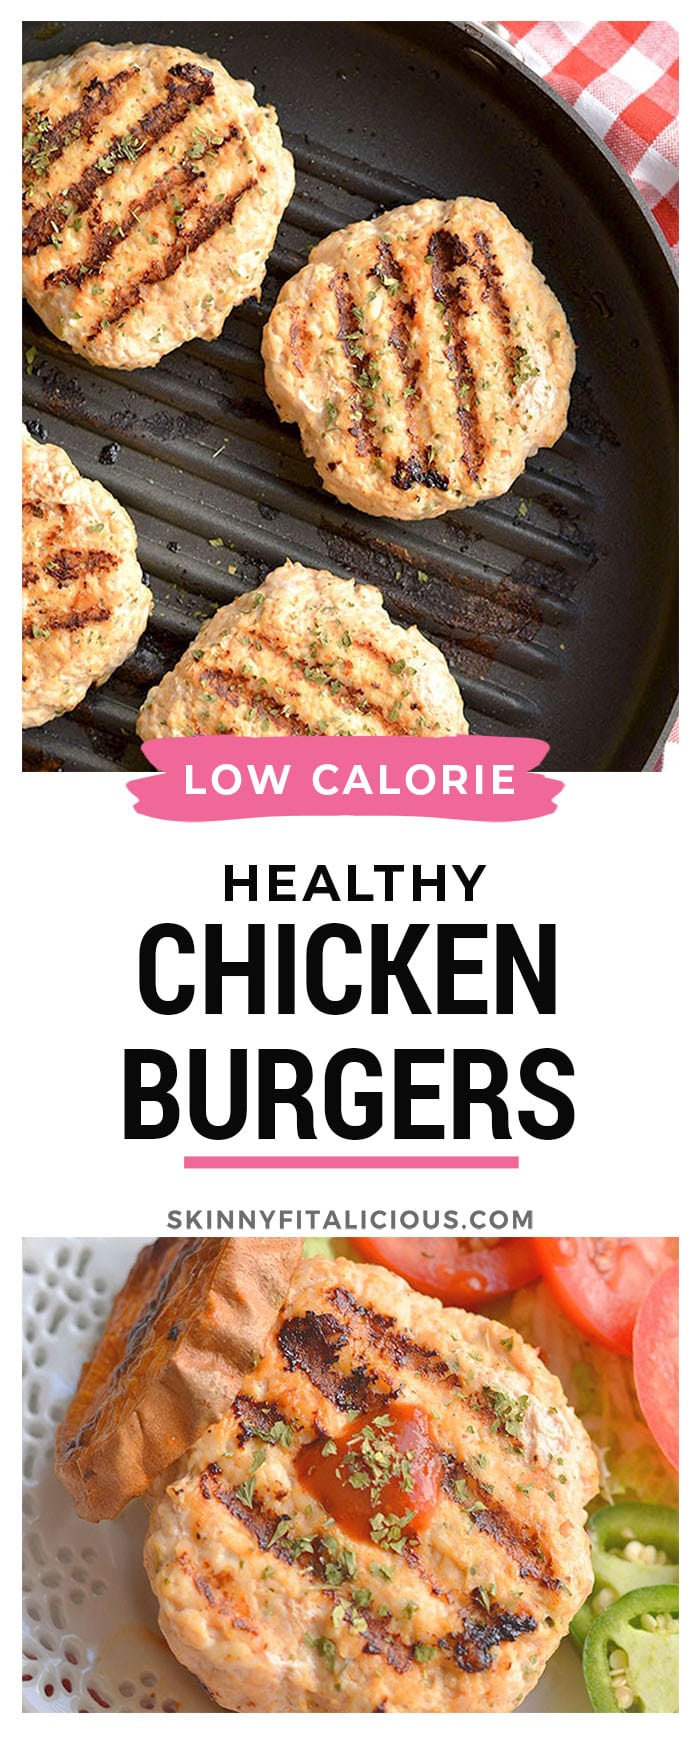 Healthy Chicken Burgers made low calorie with Sriacha sauce. An easy, high protein meal.